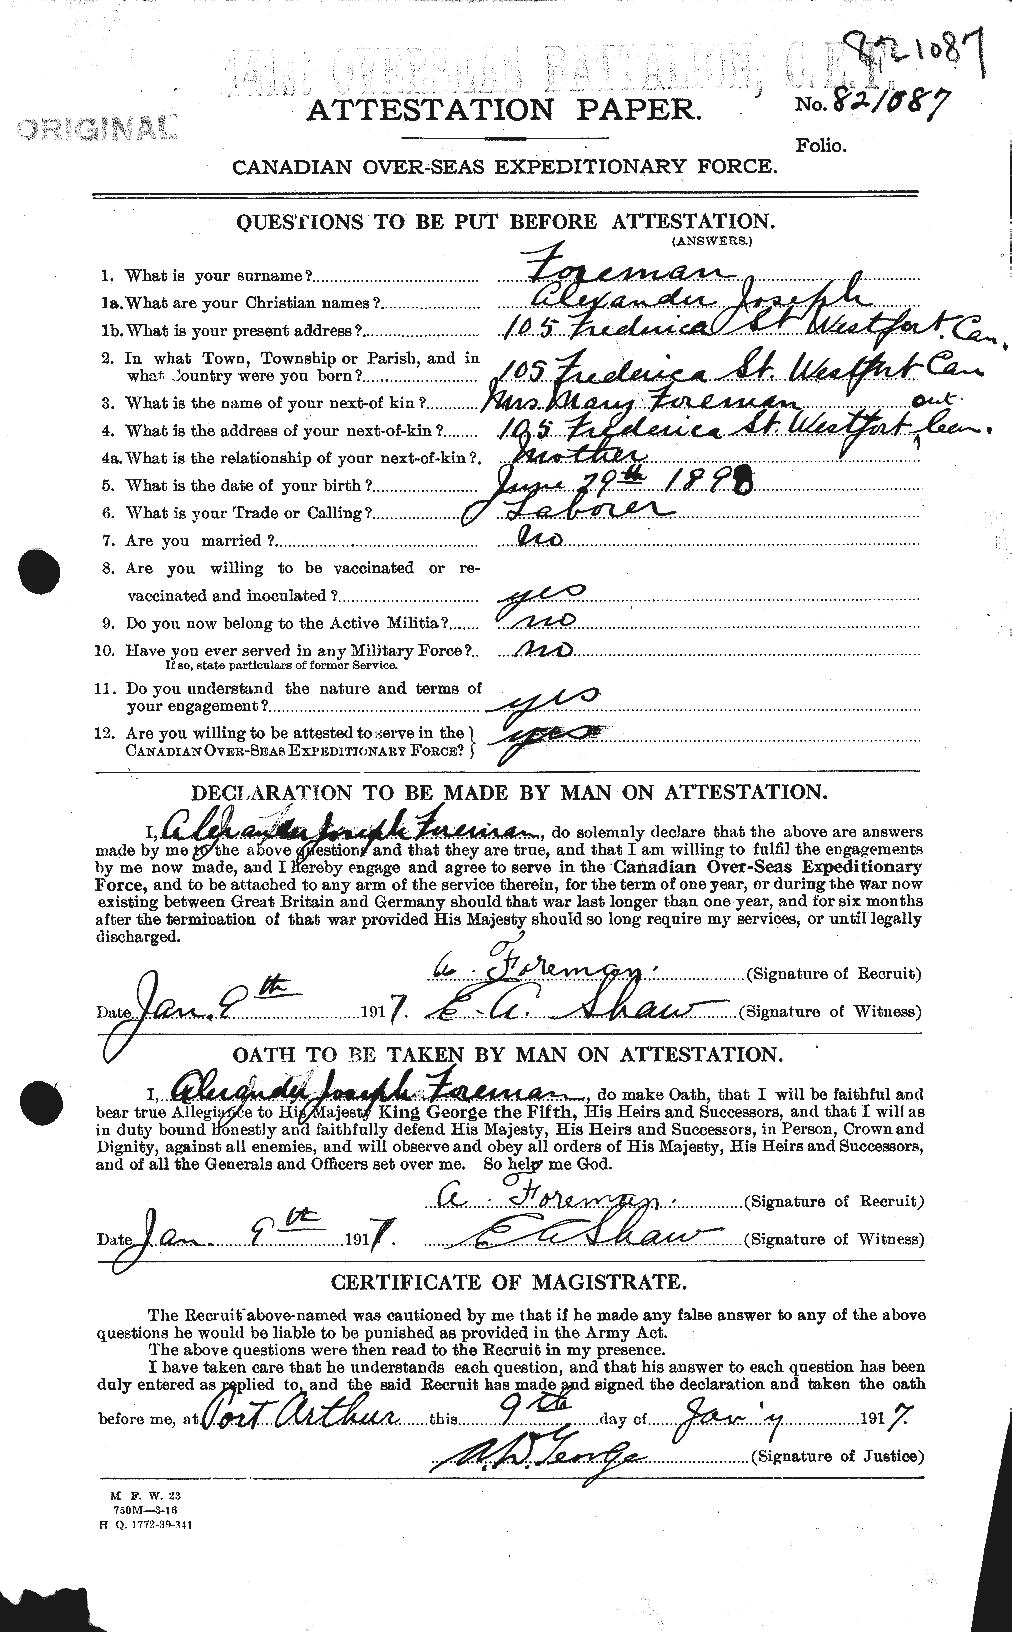 Personnel Records of the First World War - CEF 332647a